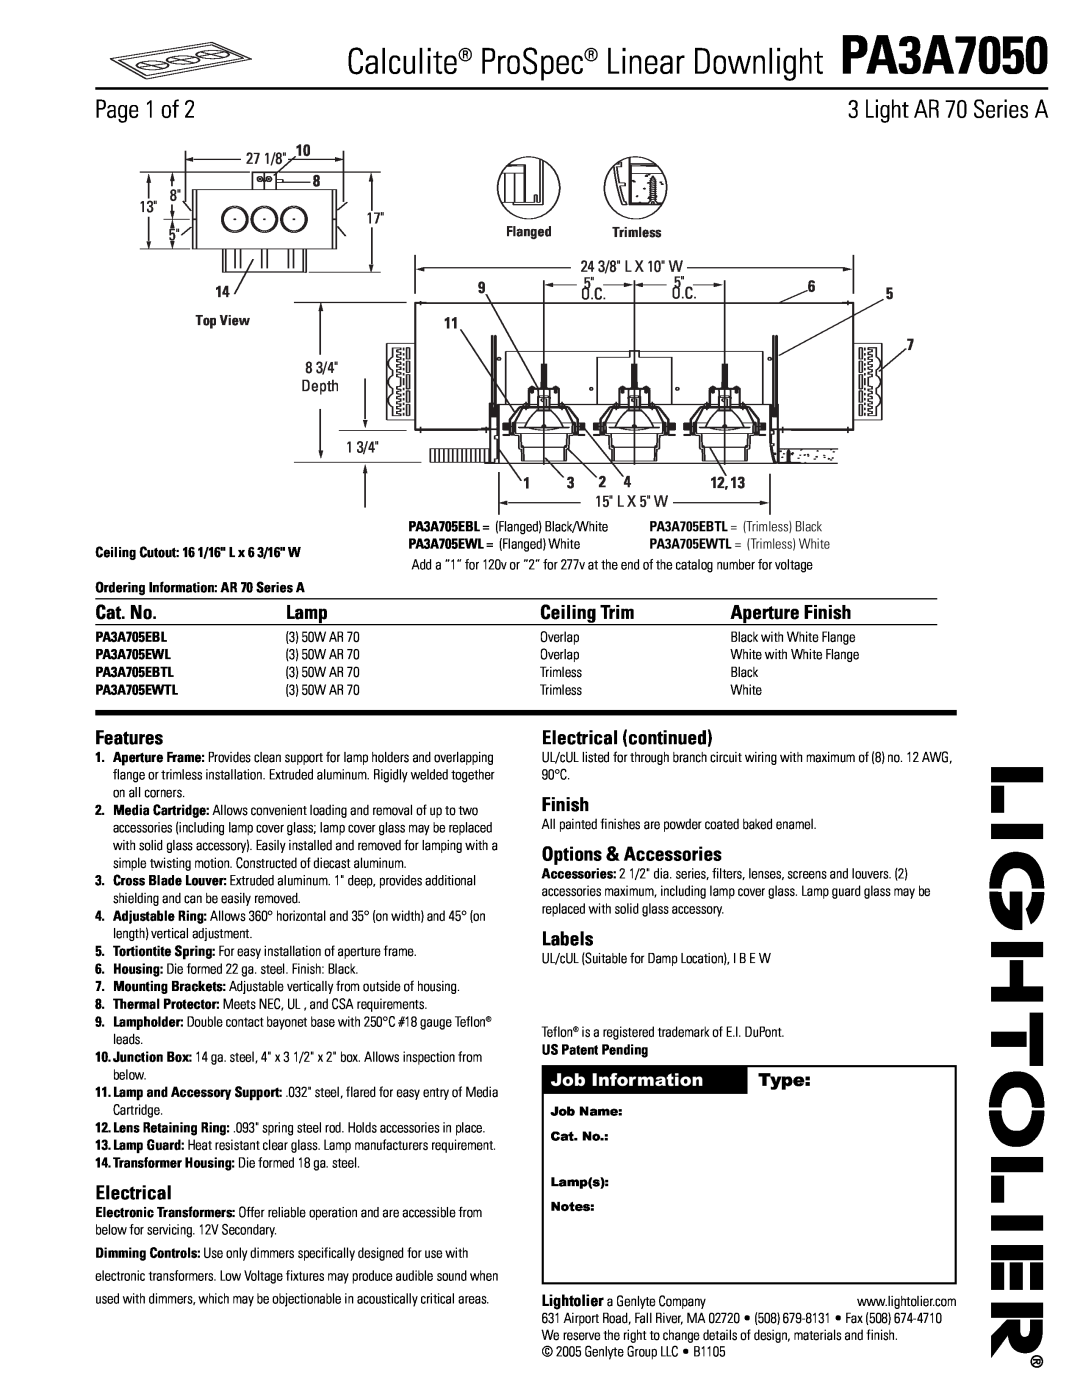 Lightolier manual Calculite ProSpec Linear Downlight PA3A7050, Page 1 of, Ceiling Trim, Type, Job Information, Top View 